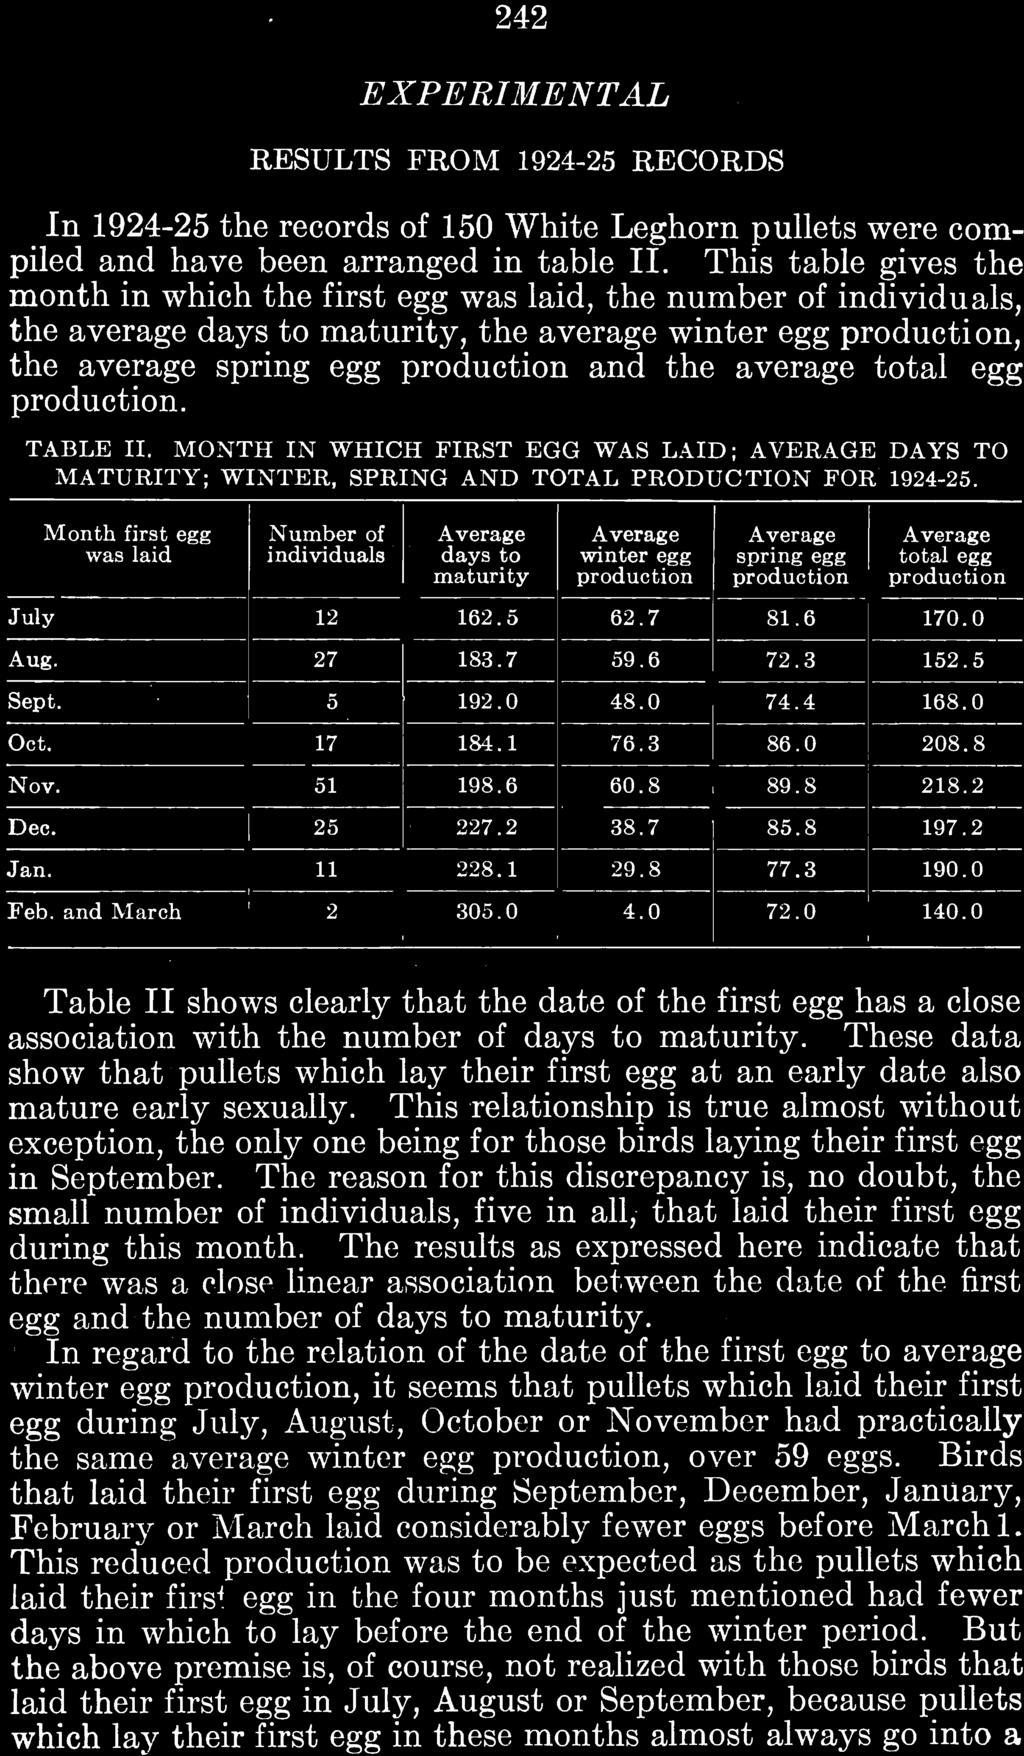 These data show that pullets which lay their first egg at an early date also mature early sexually.